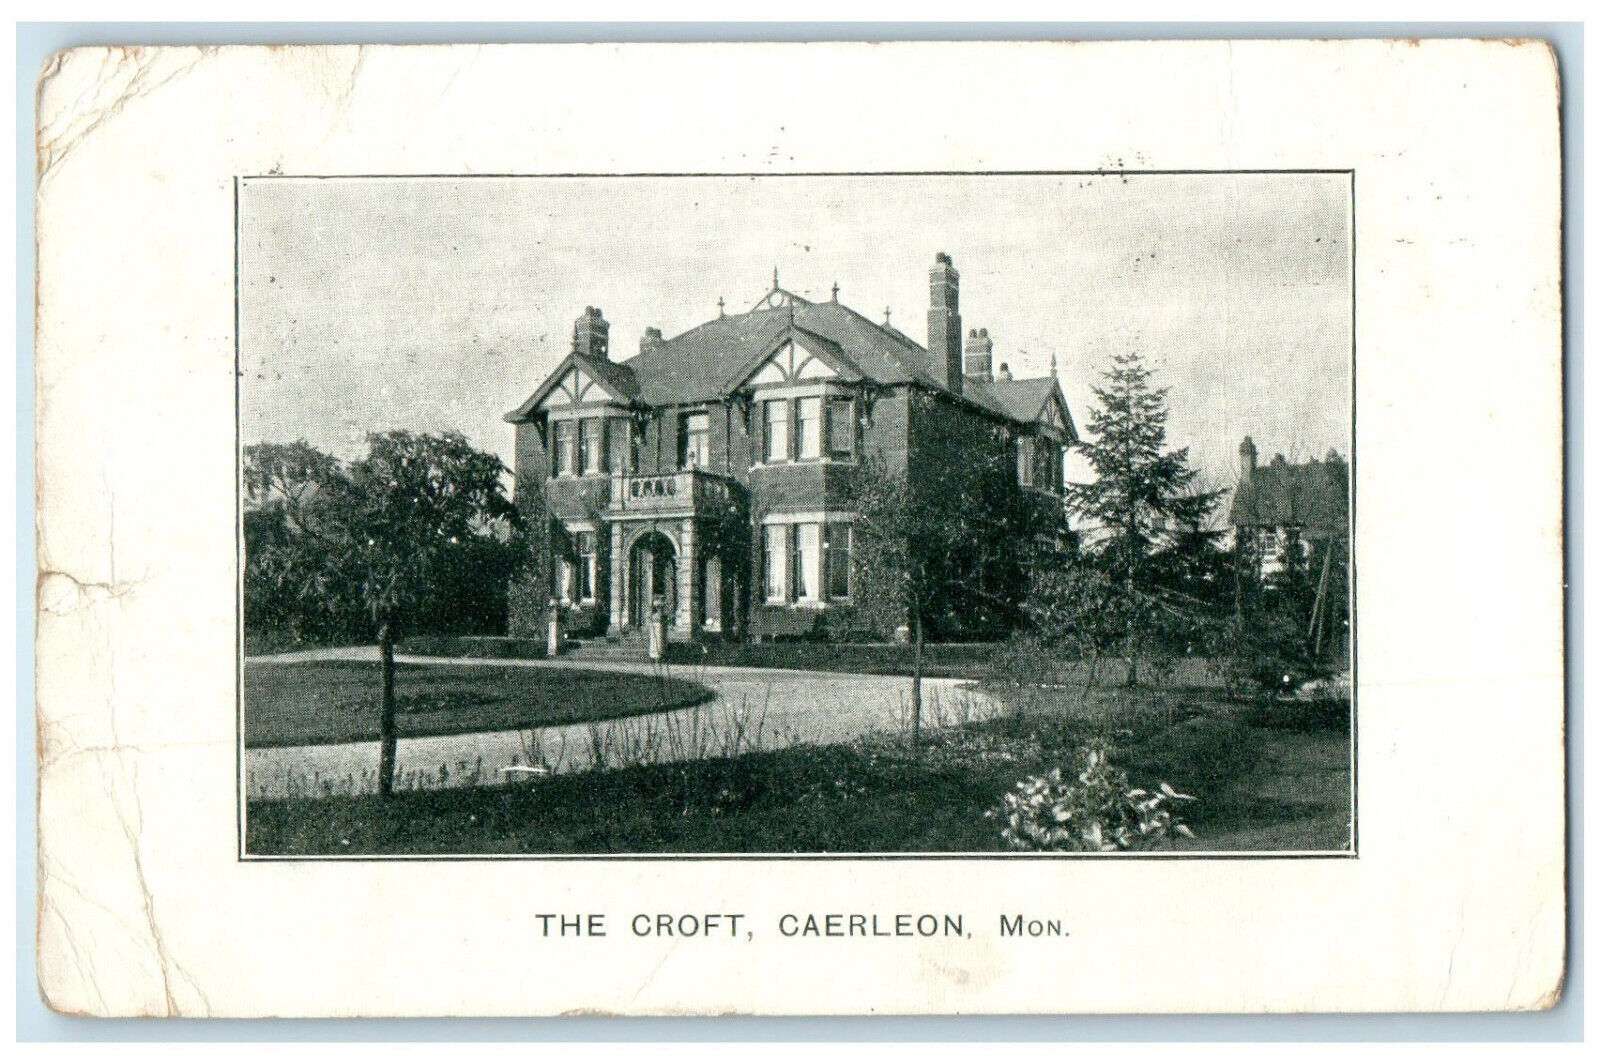 1911 Building of The Croft Caerleon Newport Wales Posted Antique Postcard